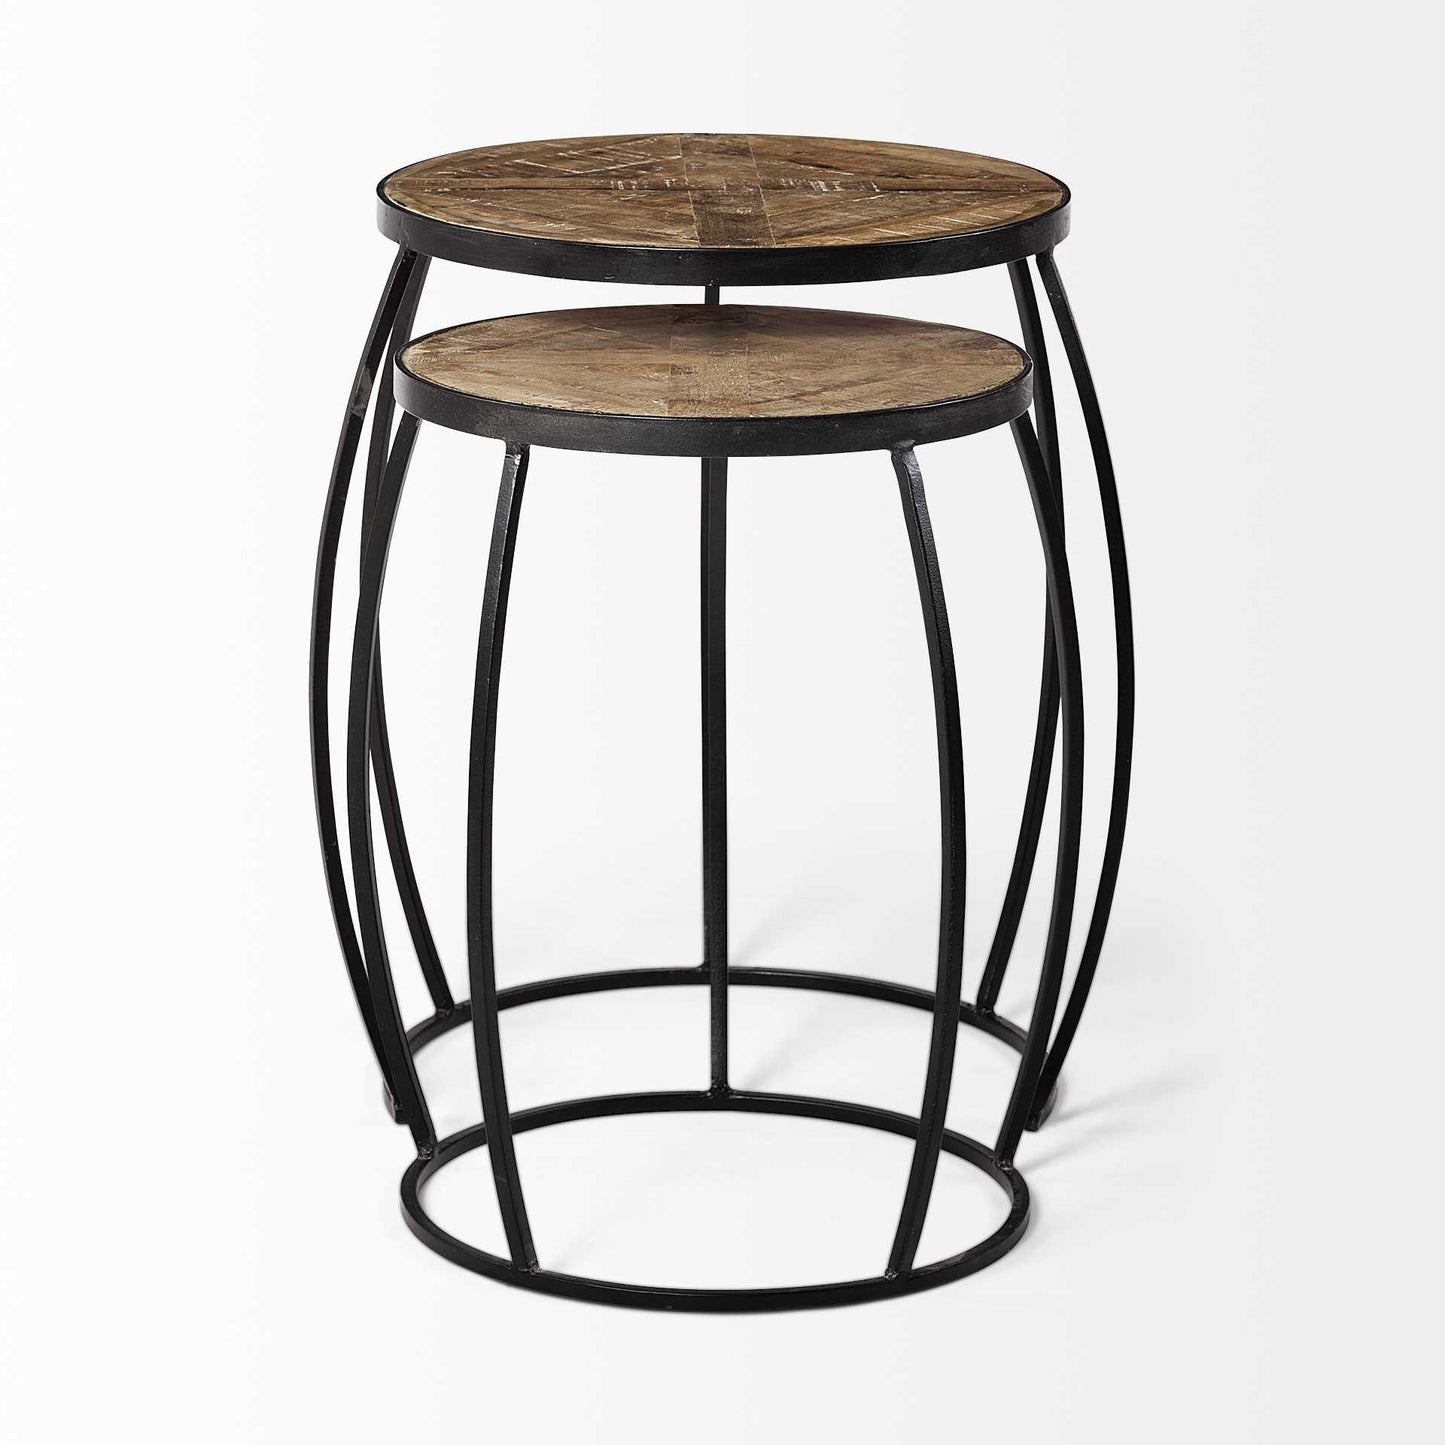 Set Of 2 Brown Wooden Round Top Accent Tables With Black Metal Frame Nesting